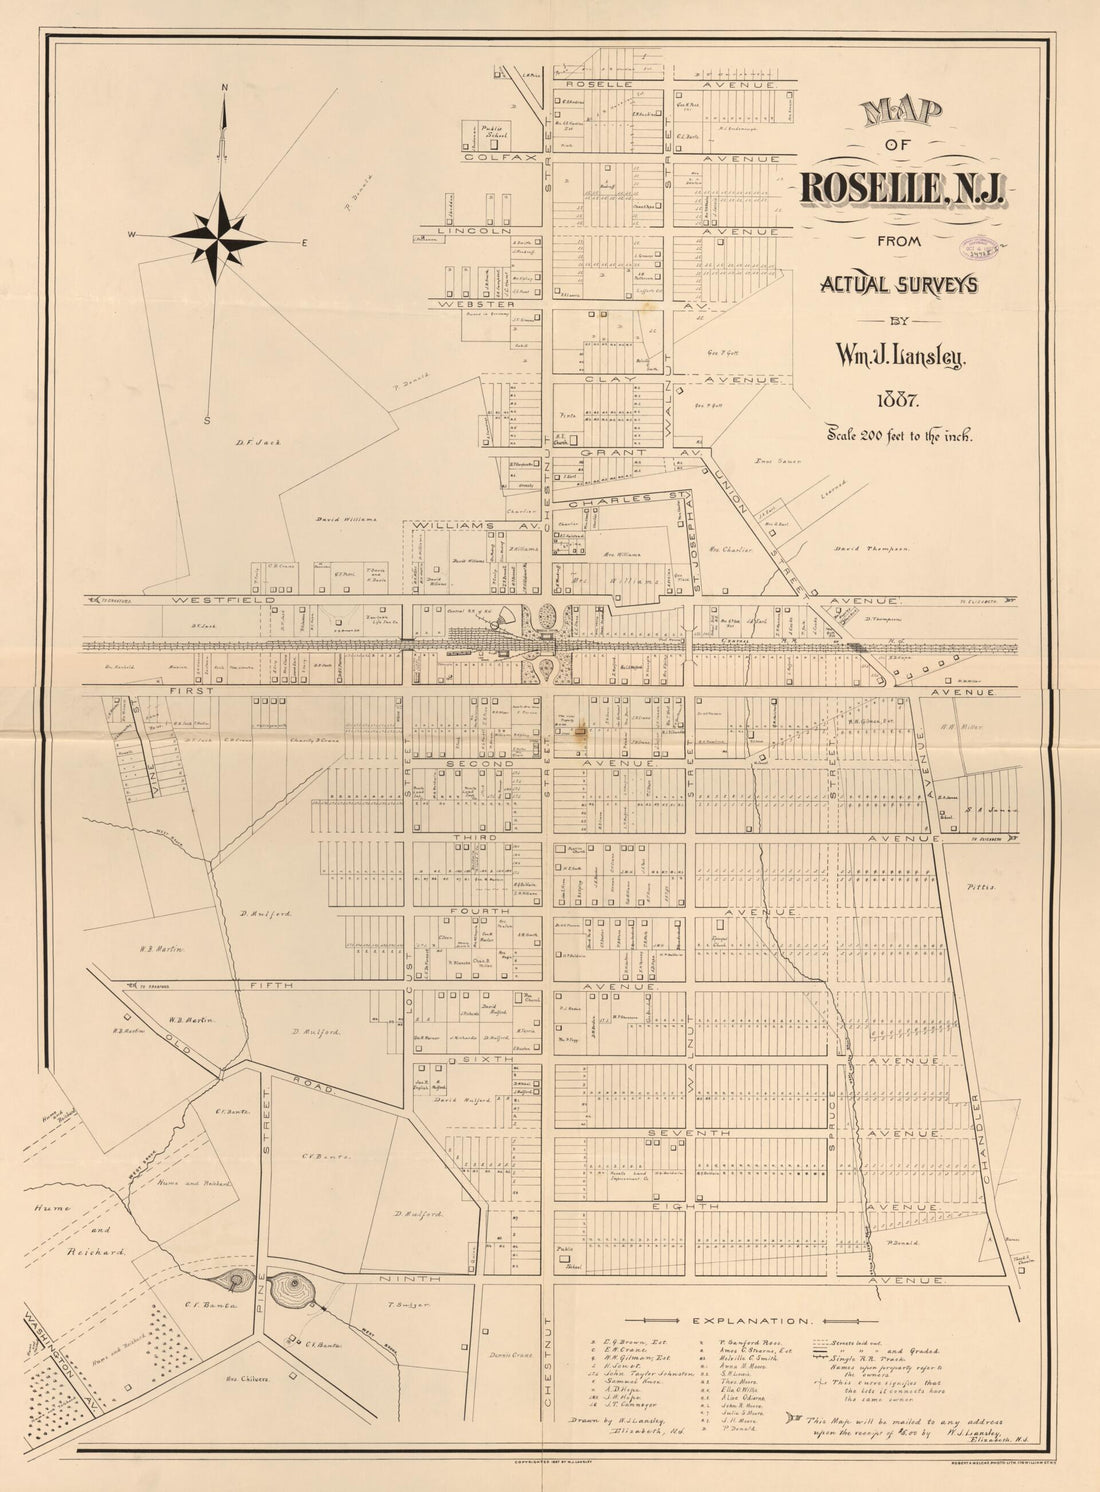 This old map of Map of Roselle, New Jersey : from Actual Surveys from 1887 was created by Wm. J. (William J.) Lansley, Robert A. Welcke in 1887